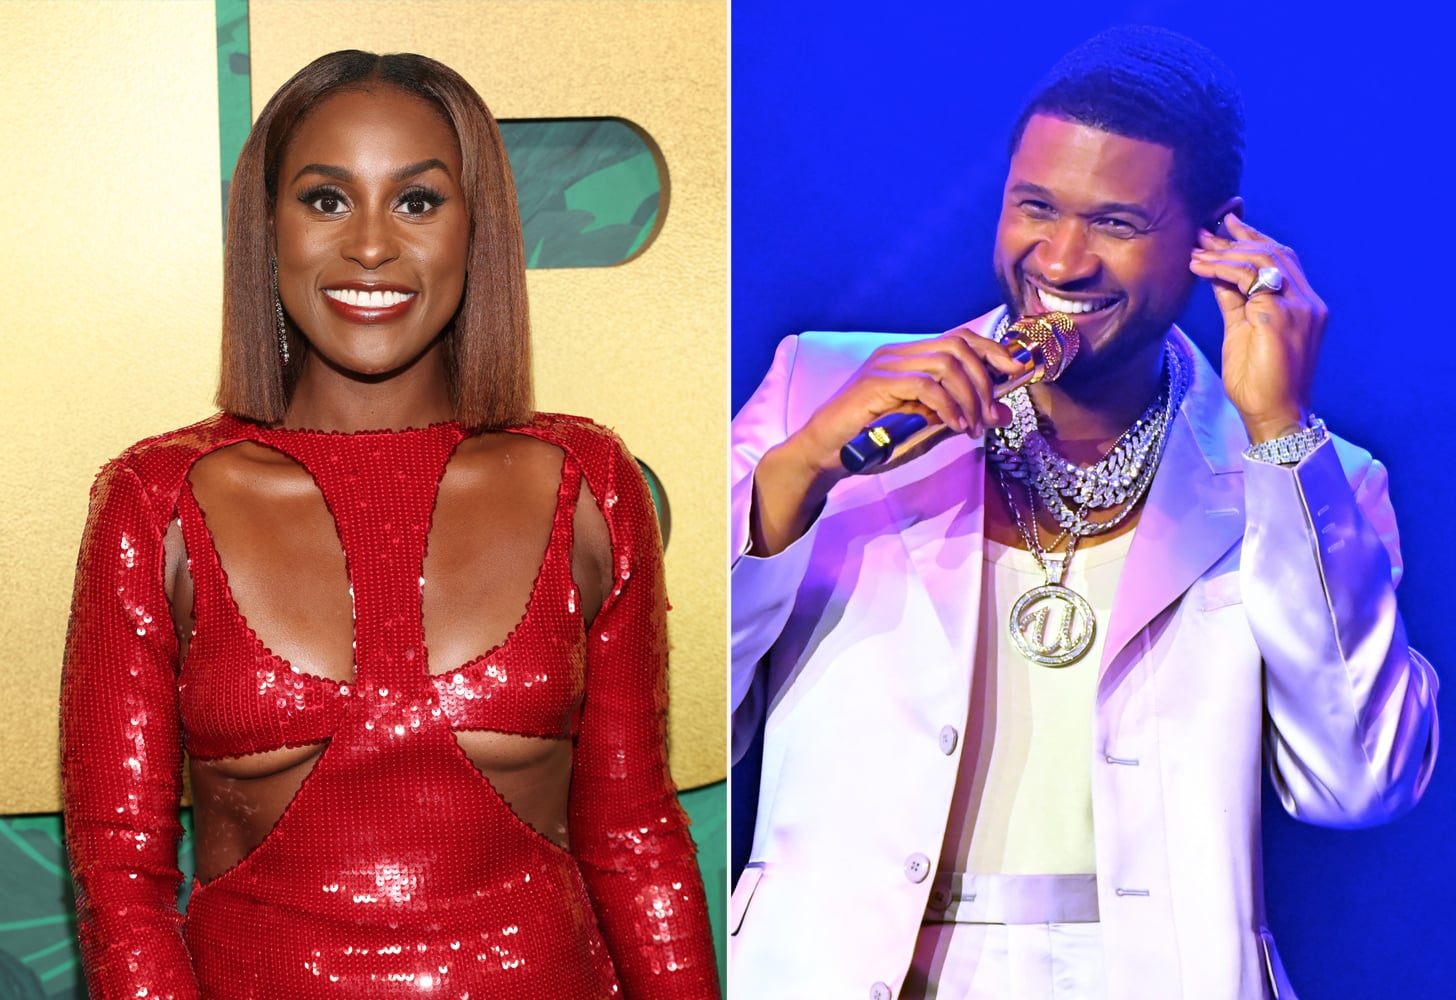 At left: Issa Rae. At right: Usher.